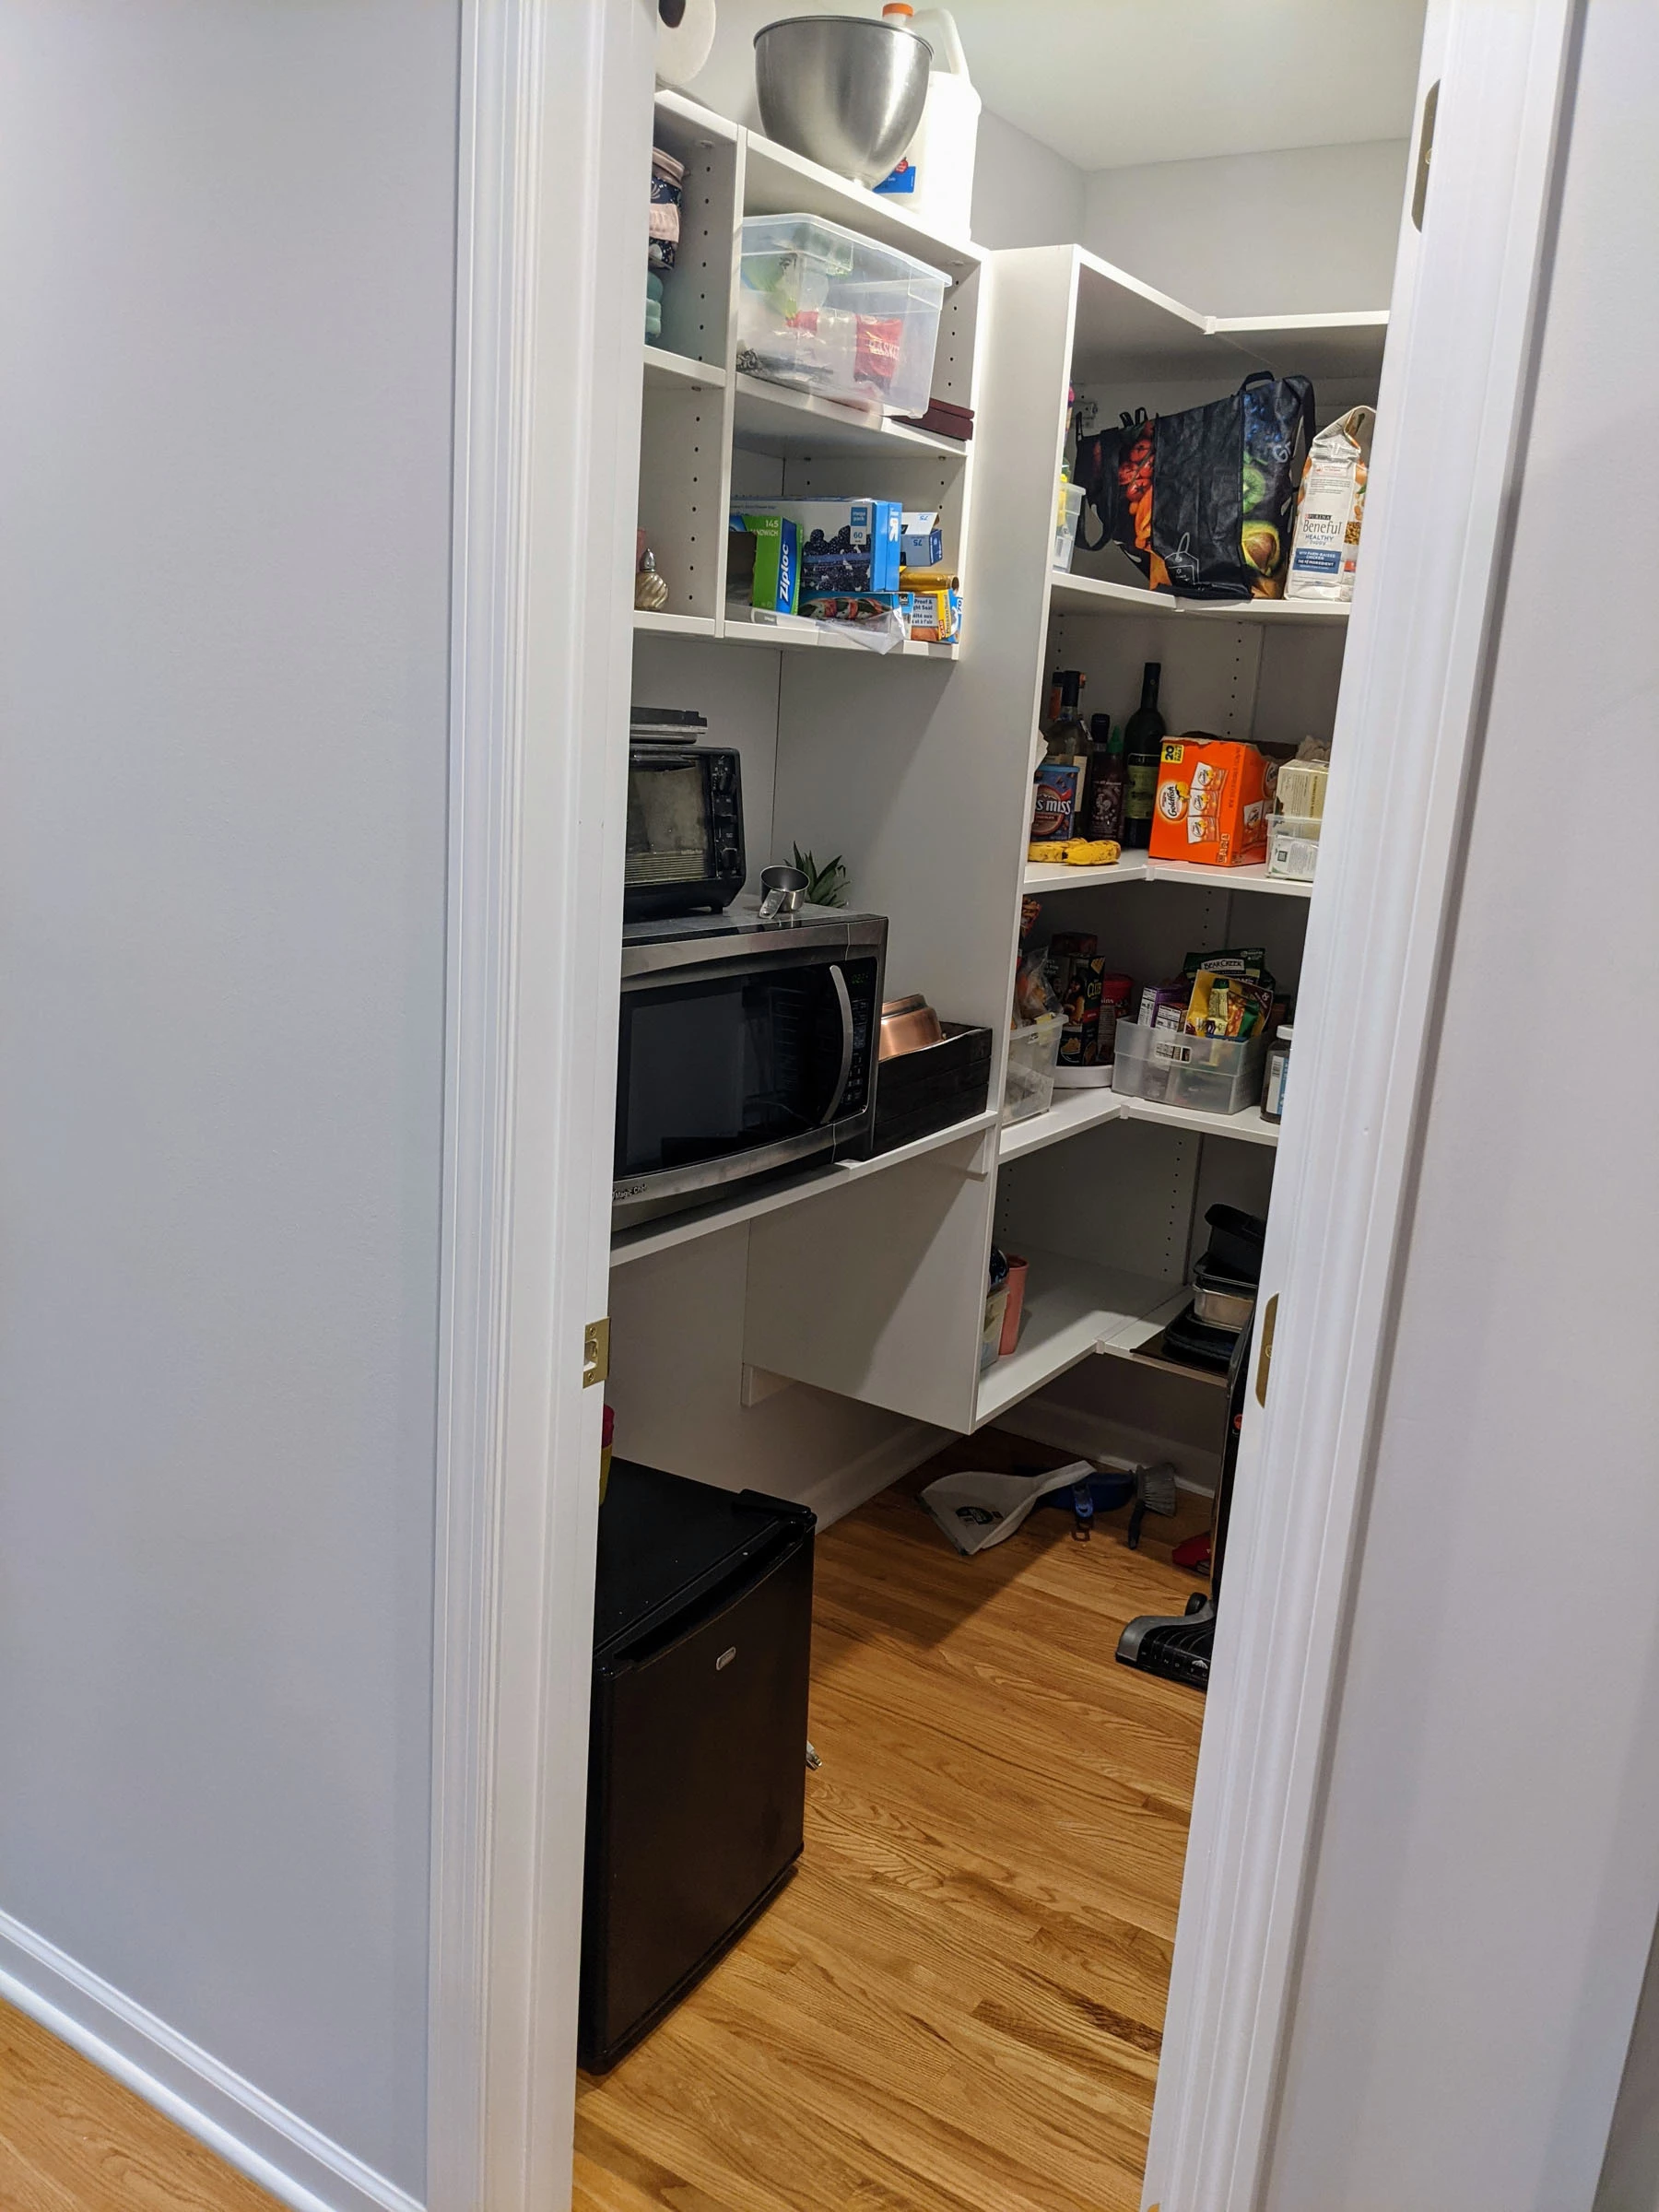 Added Walk-in Pantry